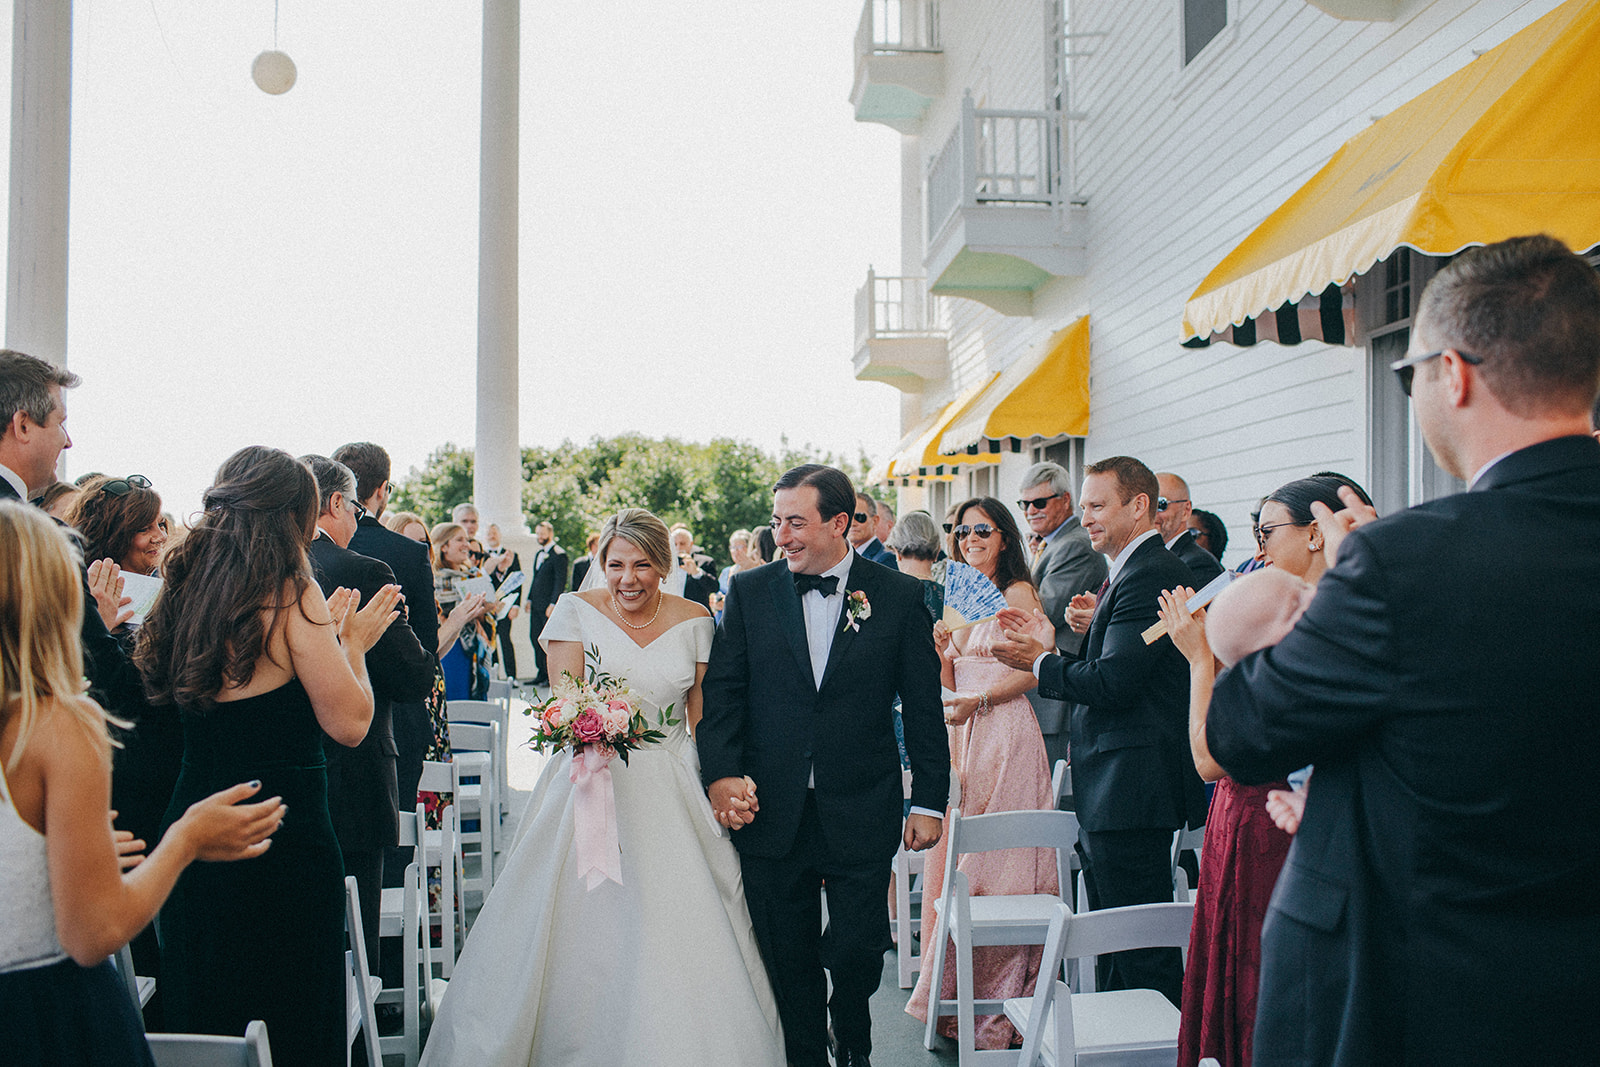 Joyful documentary wedding photographs with style from the Grand Hotel in Northern Michigan